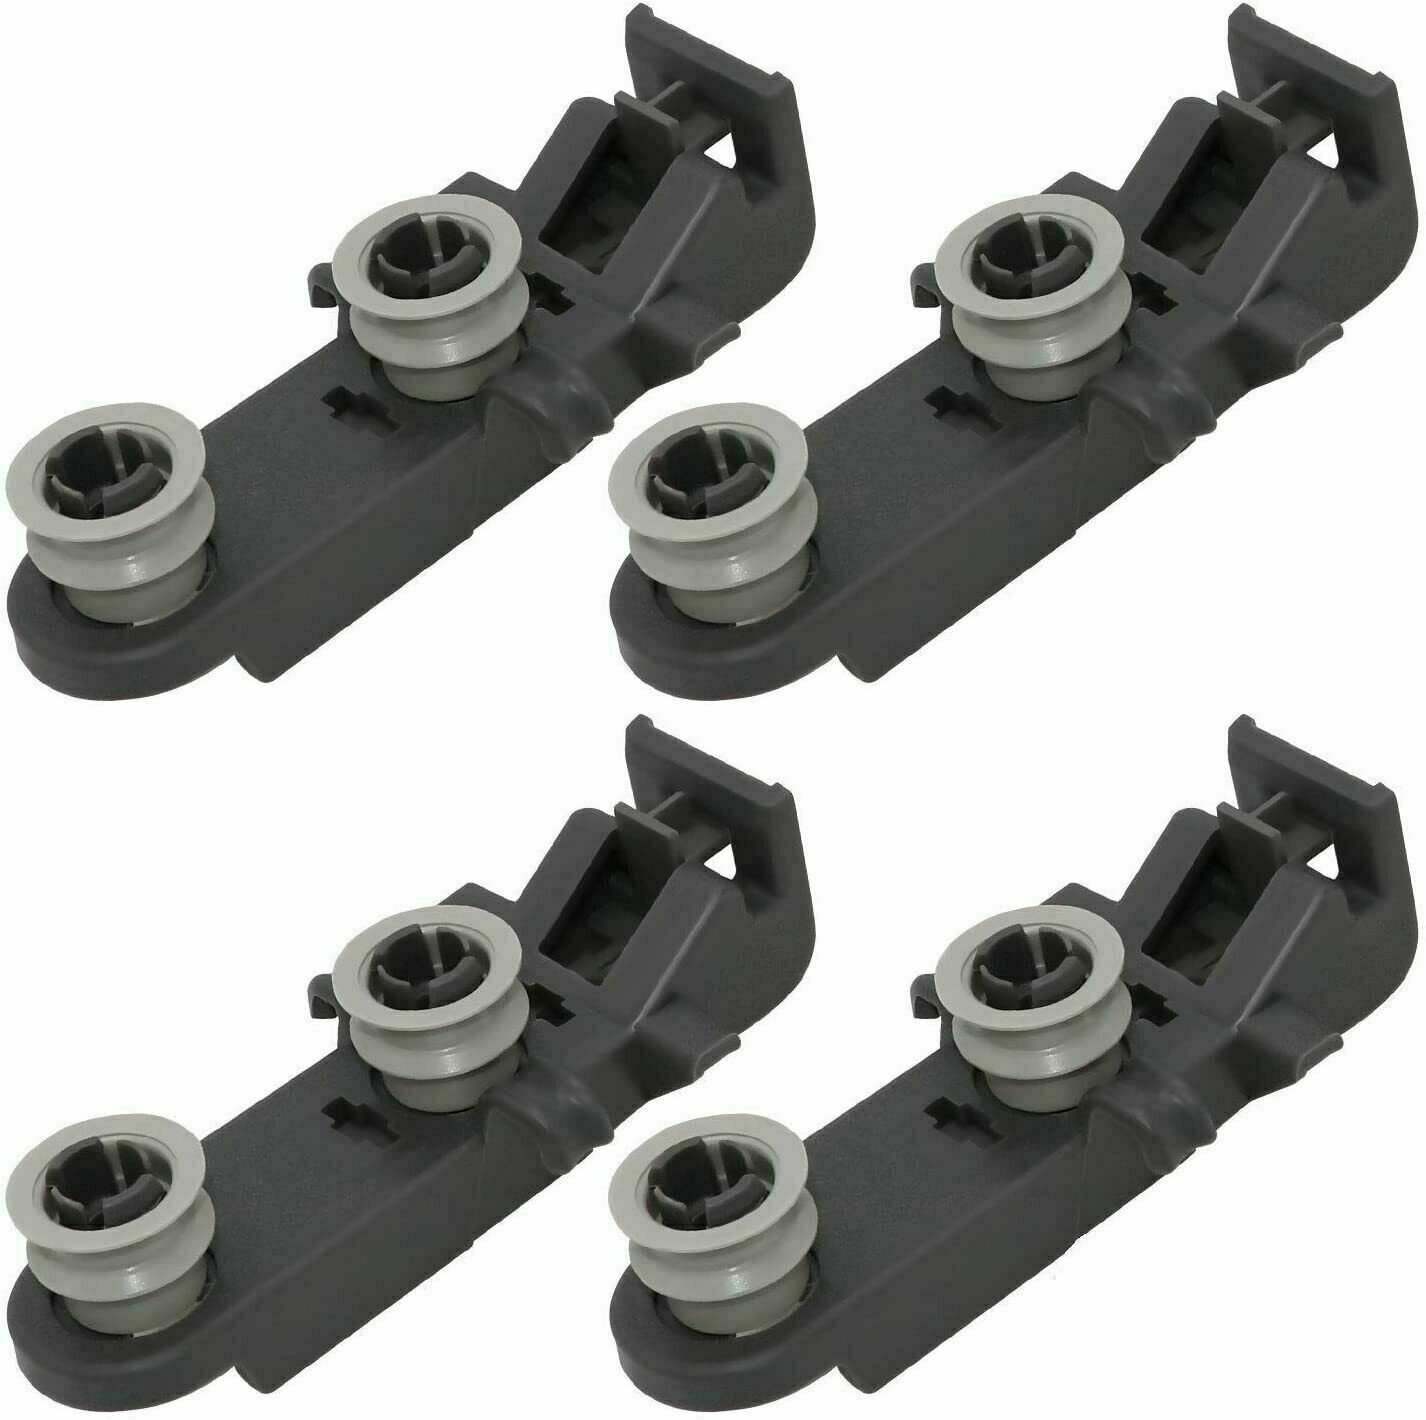 4Pcs Dishwasher Rack Roller Wheel-Whirlpool WDT710PAYB5 WDT710PAYH5 WDT710PAYW5 - $68.00